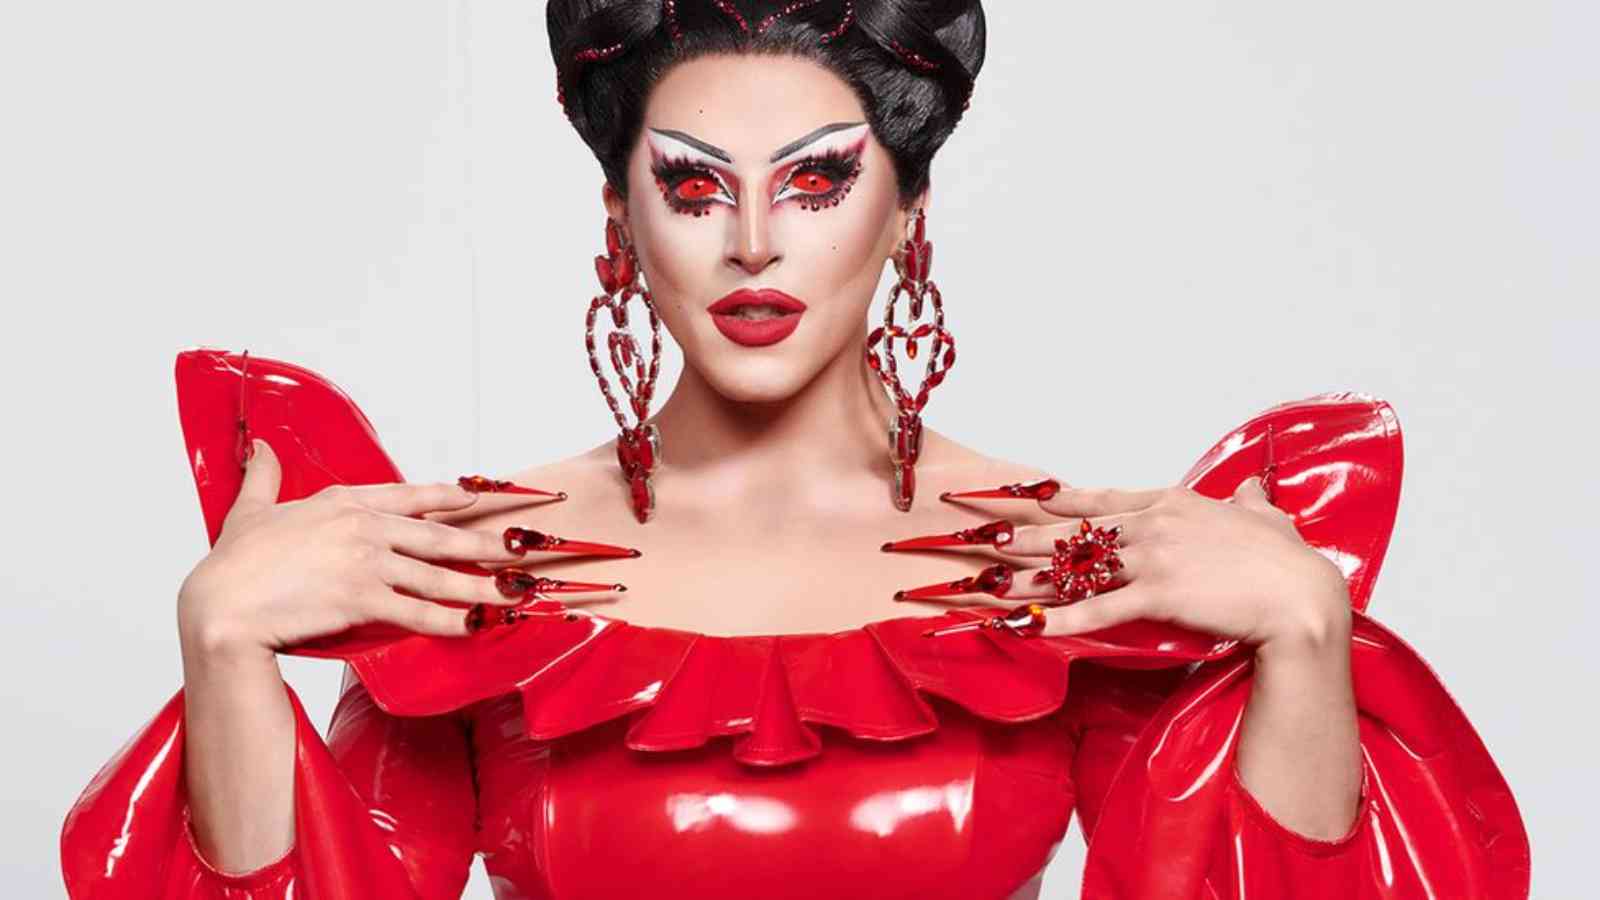 ‘RuPaul’s Drag Race’ Star Cherry Valentine Cause of Death Revealed